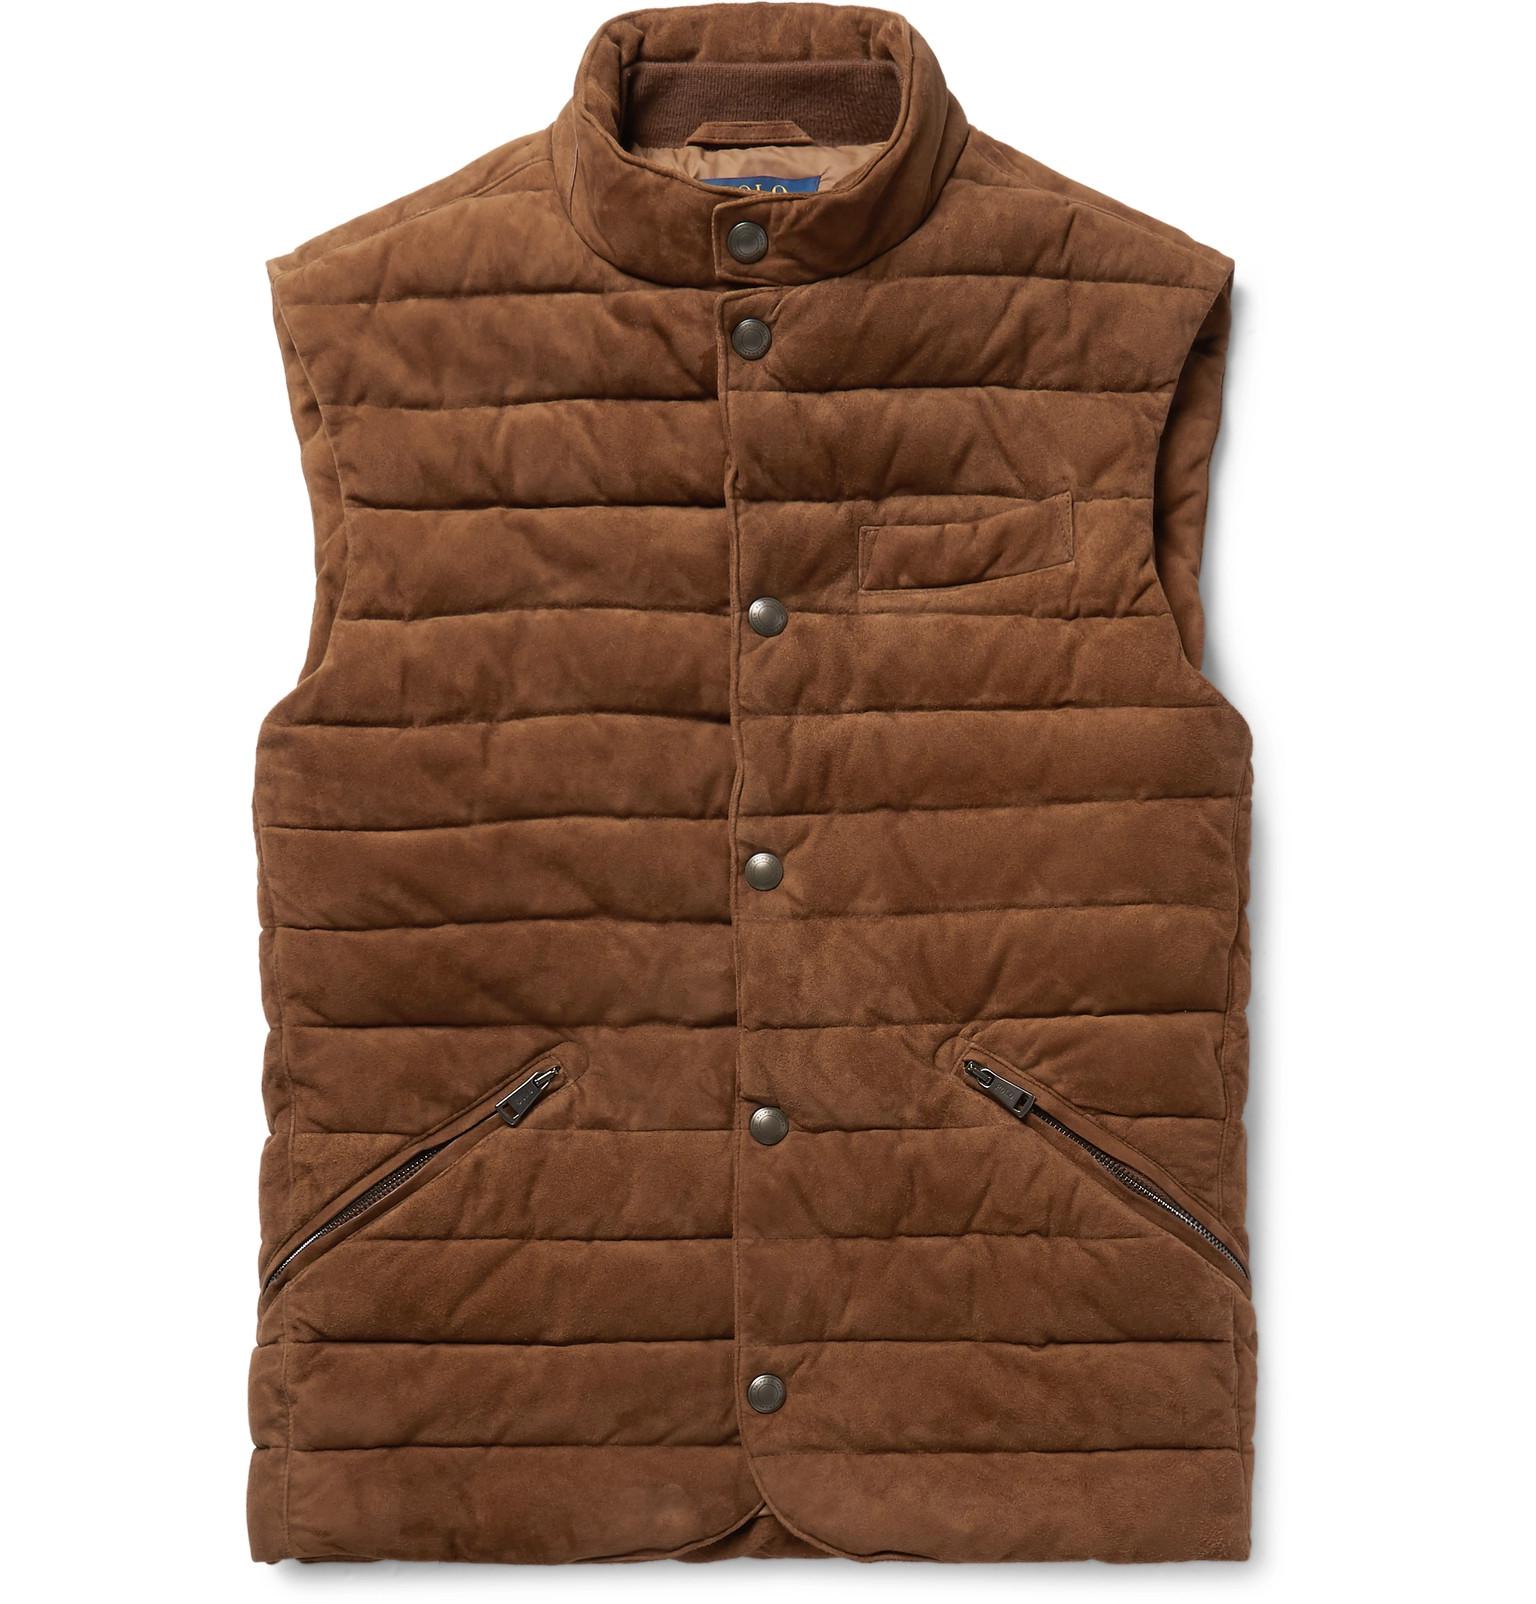 Polo Ralph Lauren Slim-fit Quilted Suede Gilet in Brown for Men - Lyst